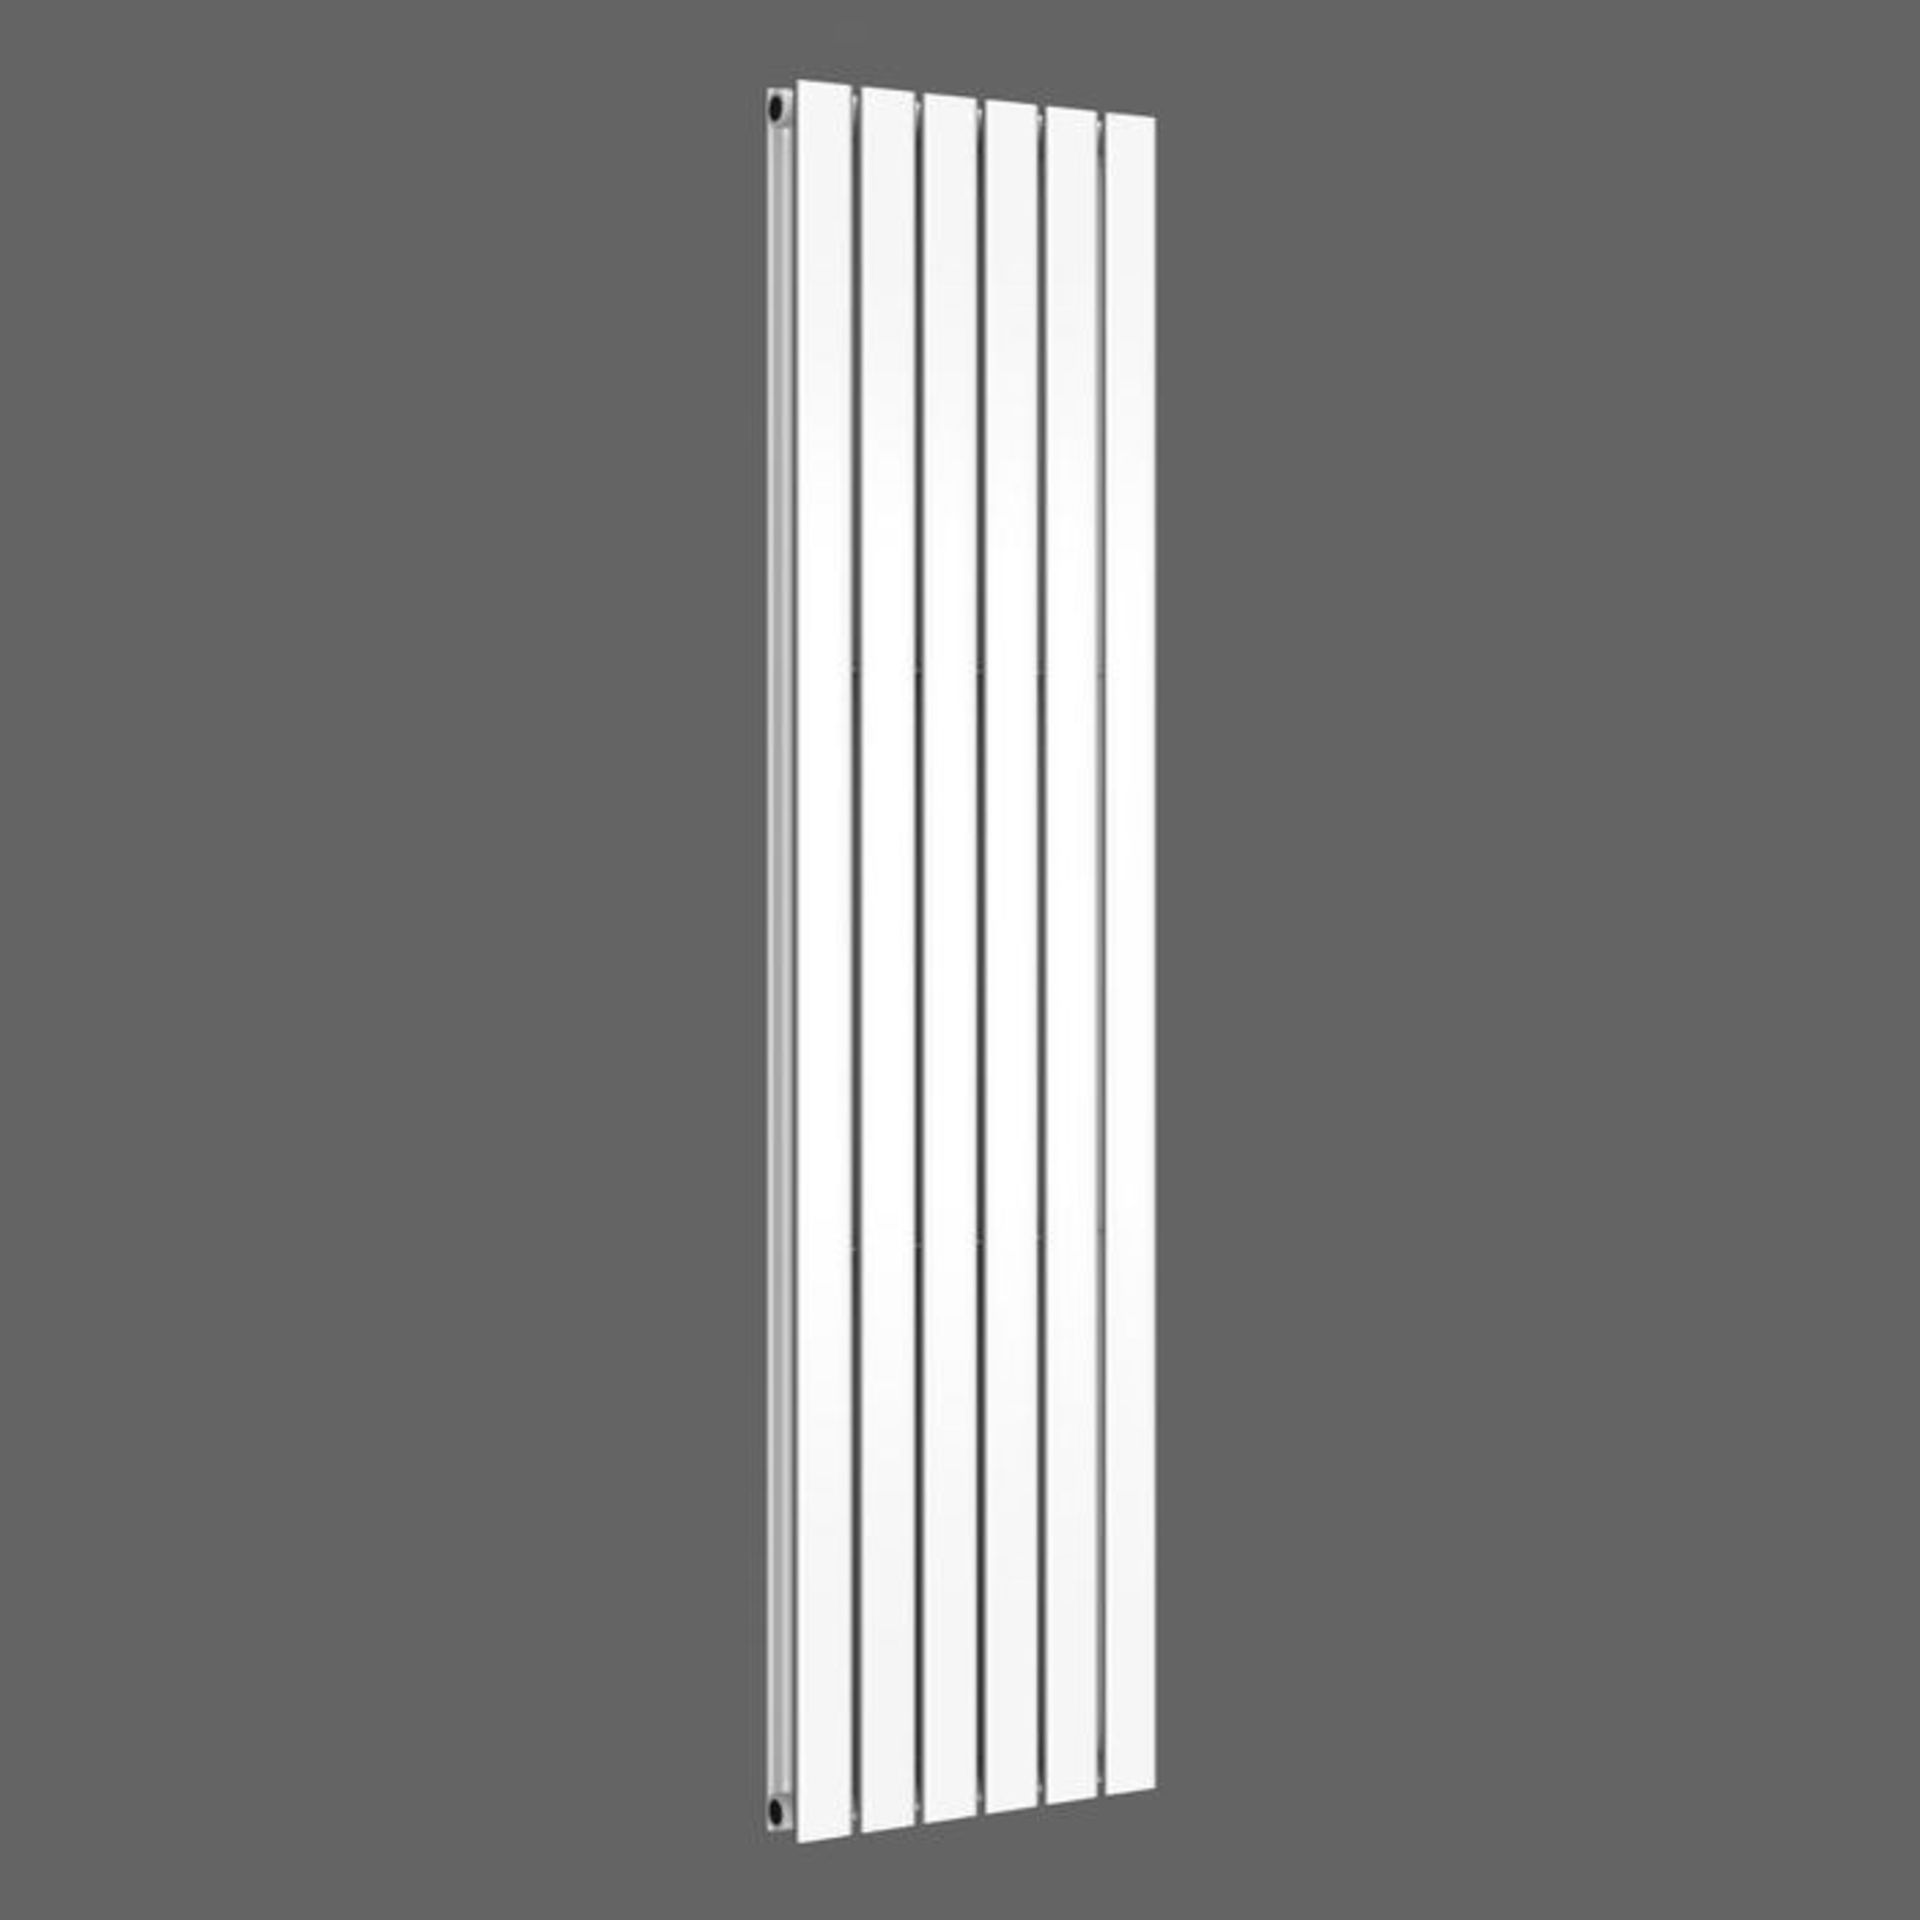 BRAND NEW BOXED 1800x452mm Gloss White Double Flat Panel Vertical Radiator.RRP £499.99. - Image 2 of 2